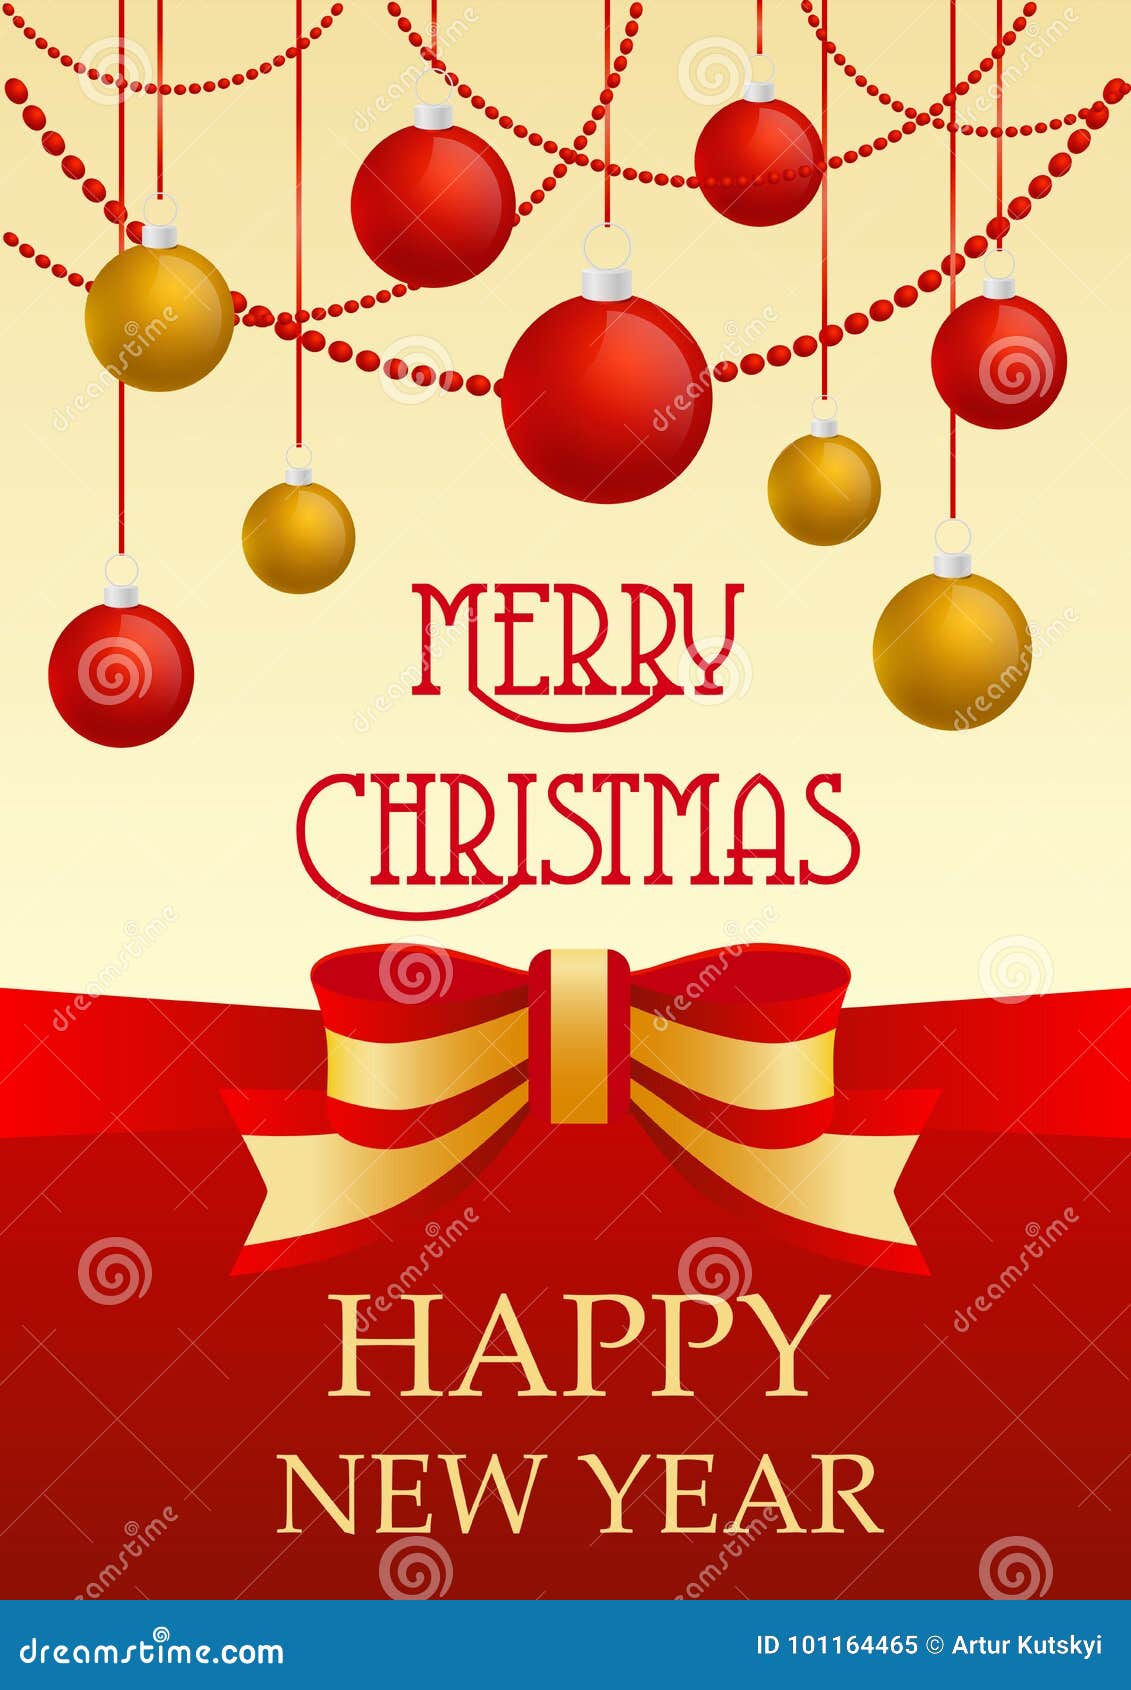 Vector Greeting card with traditional red and golden yellow decorations dedicated to Christmas and New Year